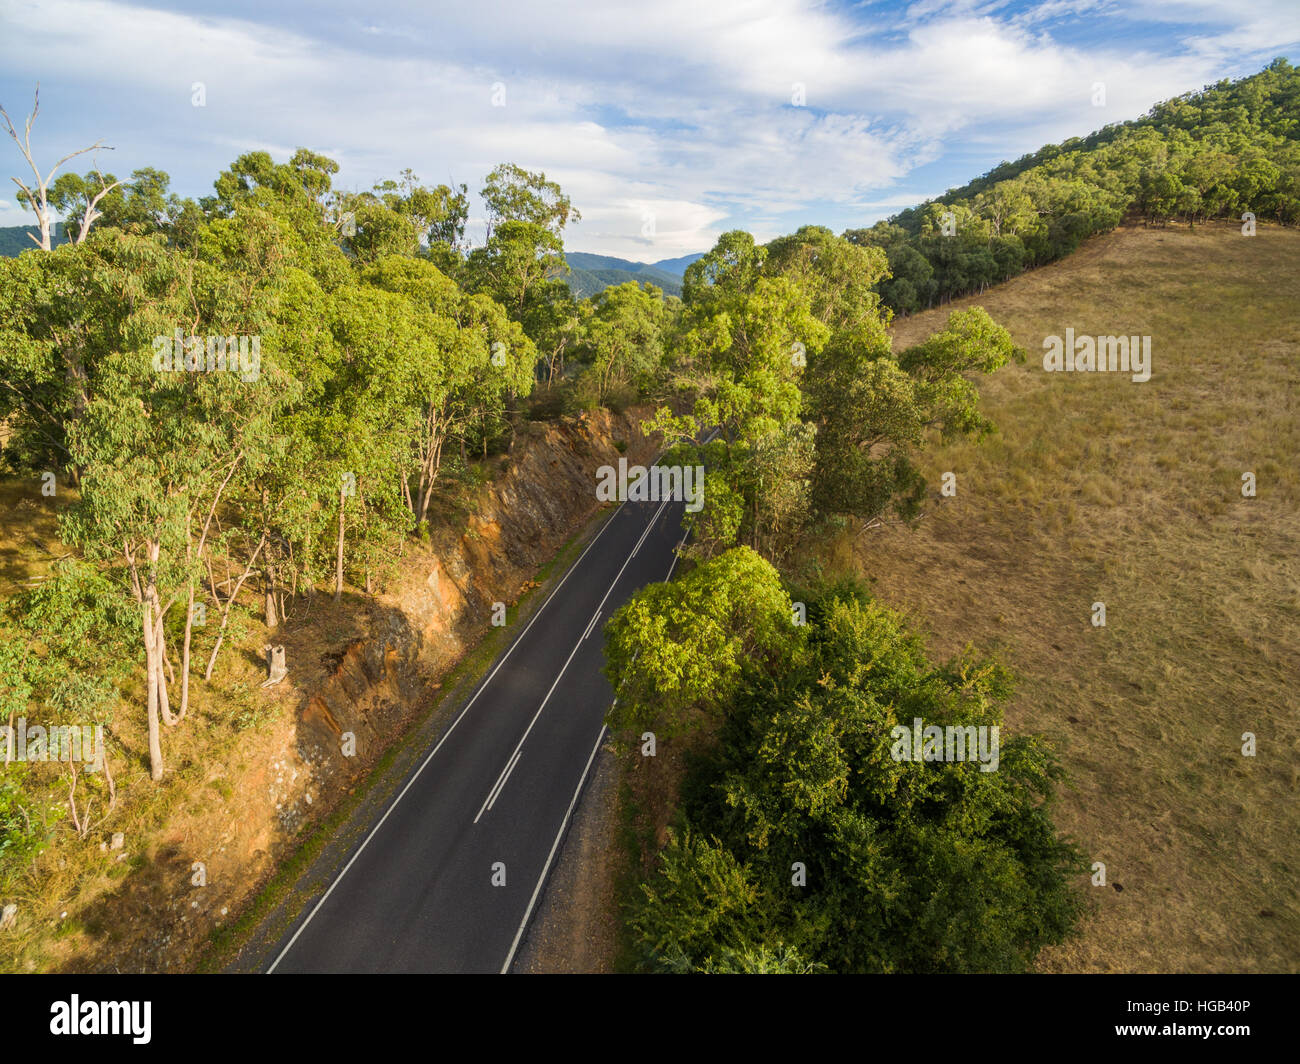 Aerial view of rural road amongst hills and trees Stock Photo